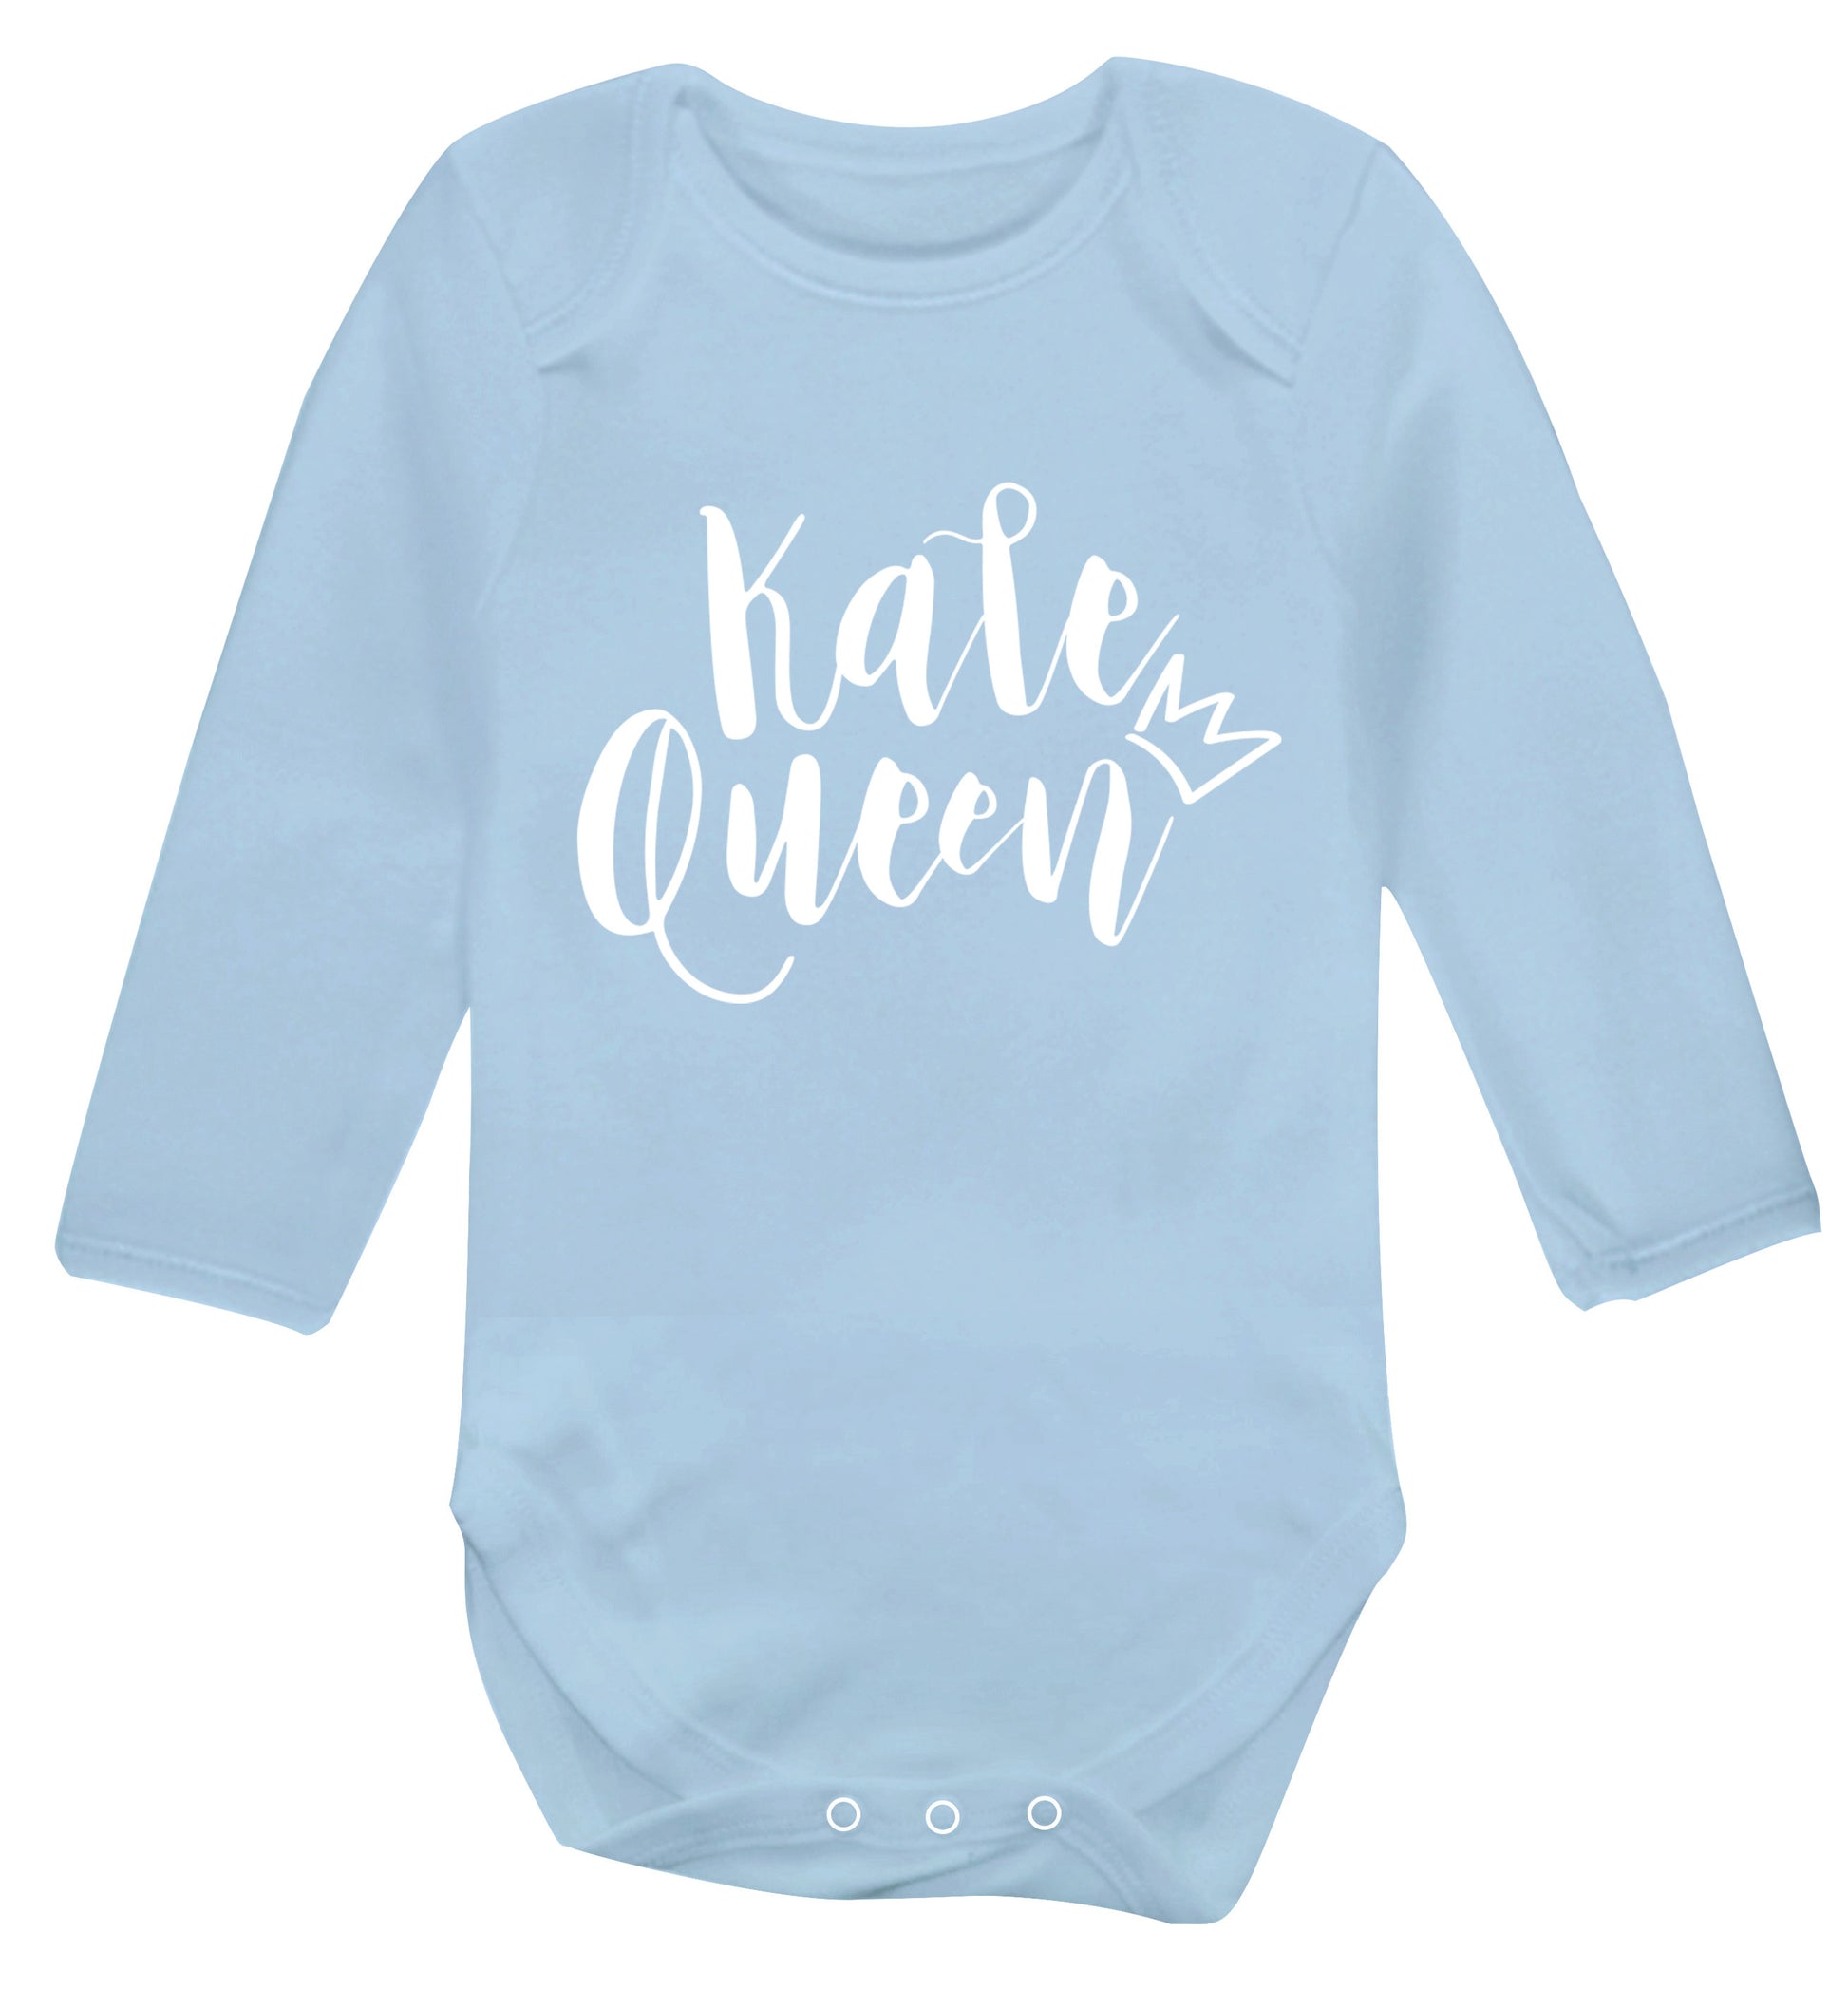 Kale Queen Baby Vest long sleeved pale blue 6-12 months